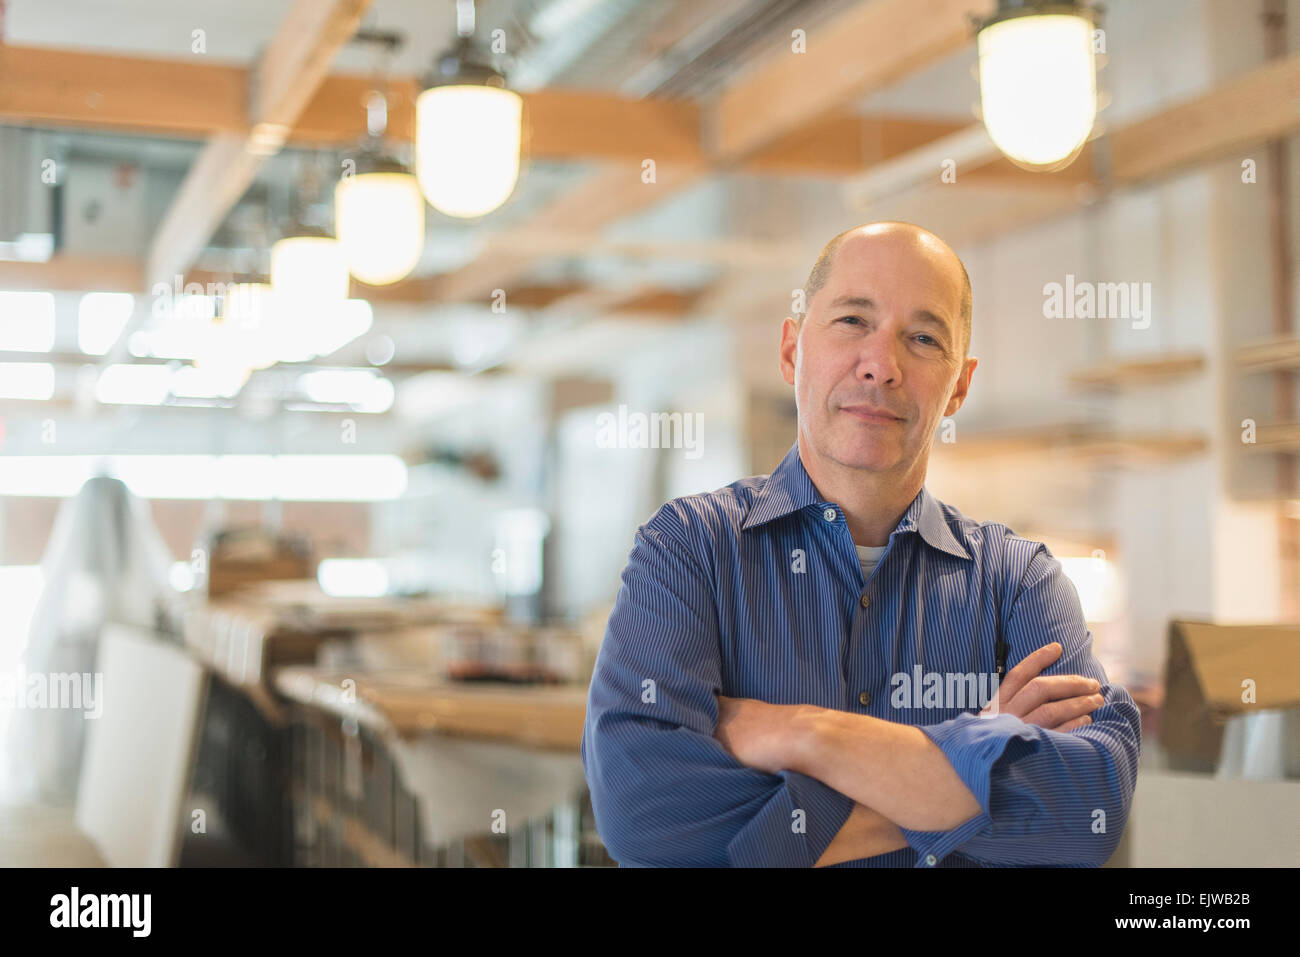 Portrait of business owner Stock Photo